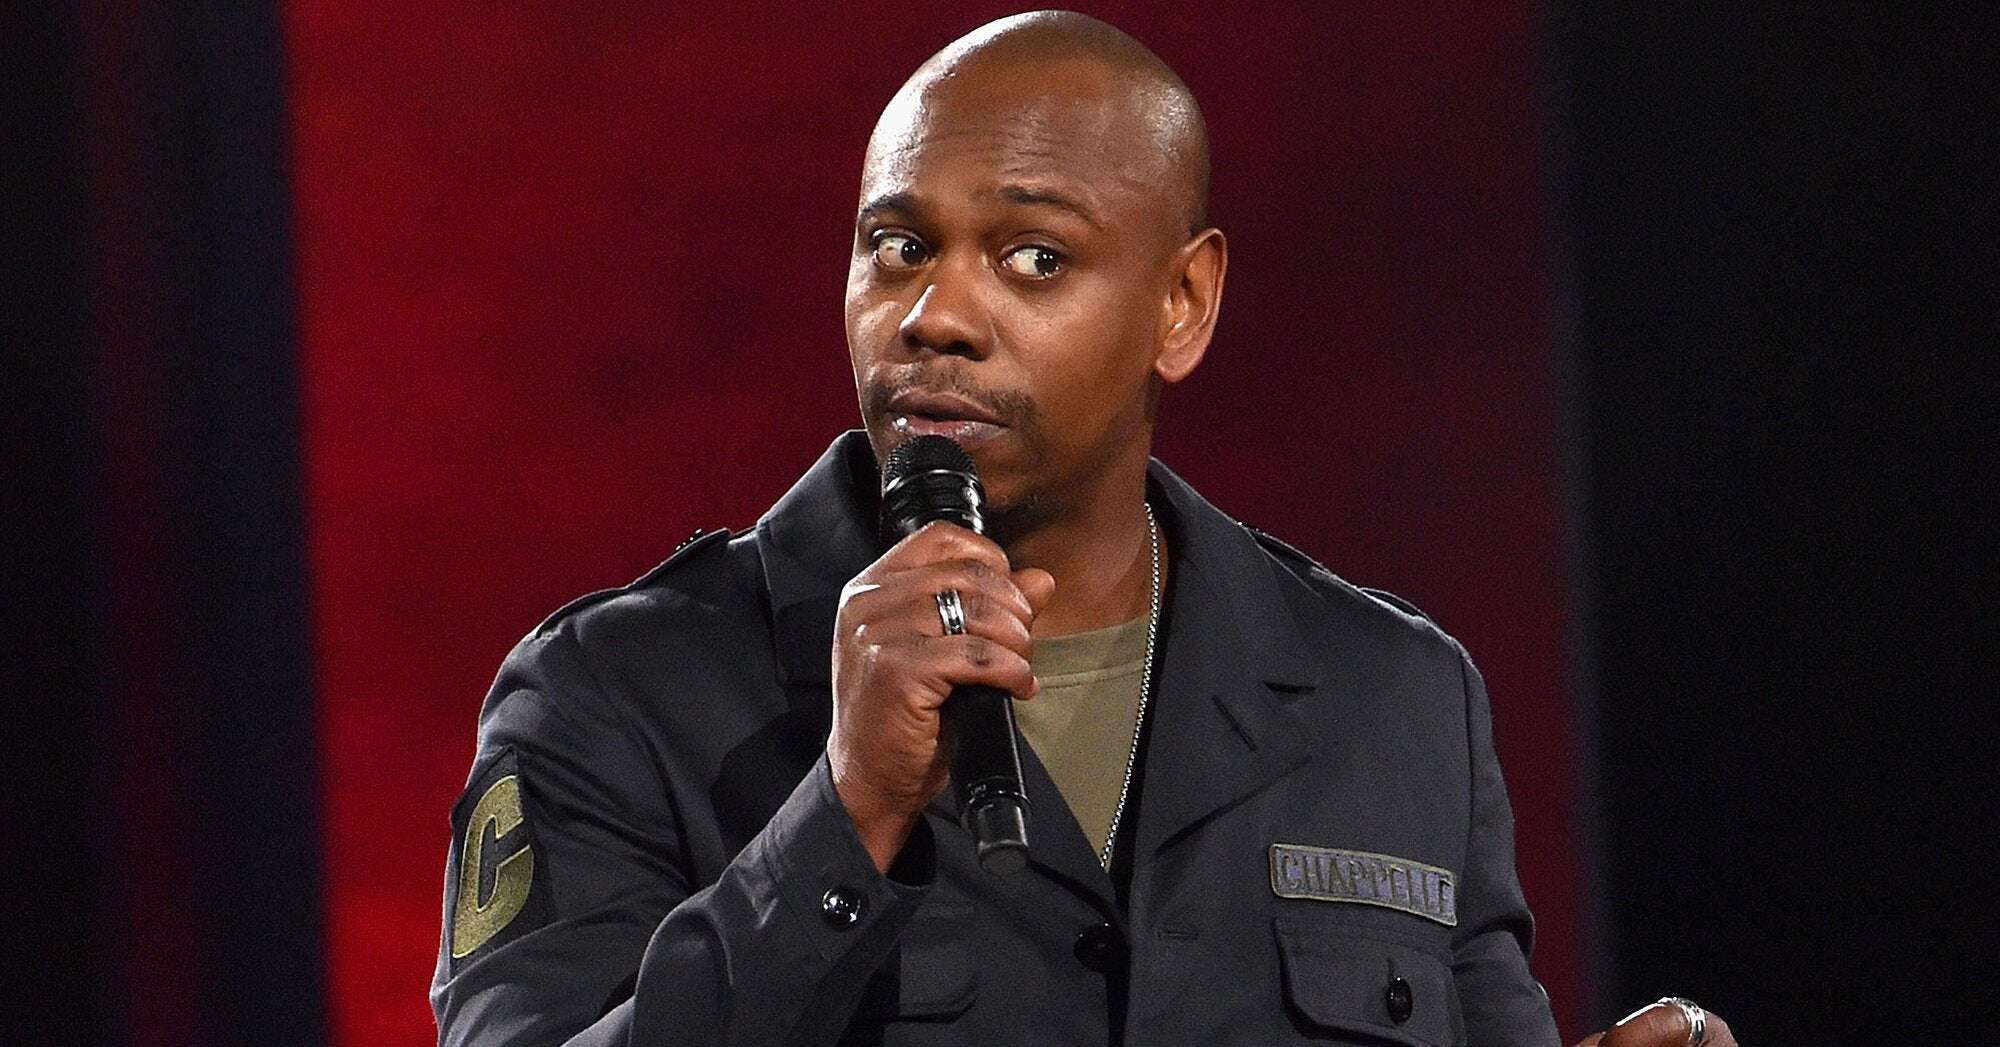 image for Dave Chappelle helps raise over $100k for struggling comics during coronavirus pandemic